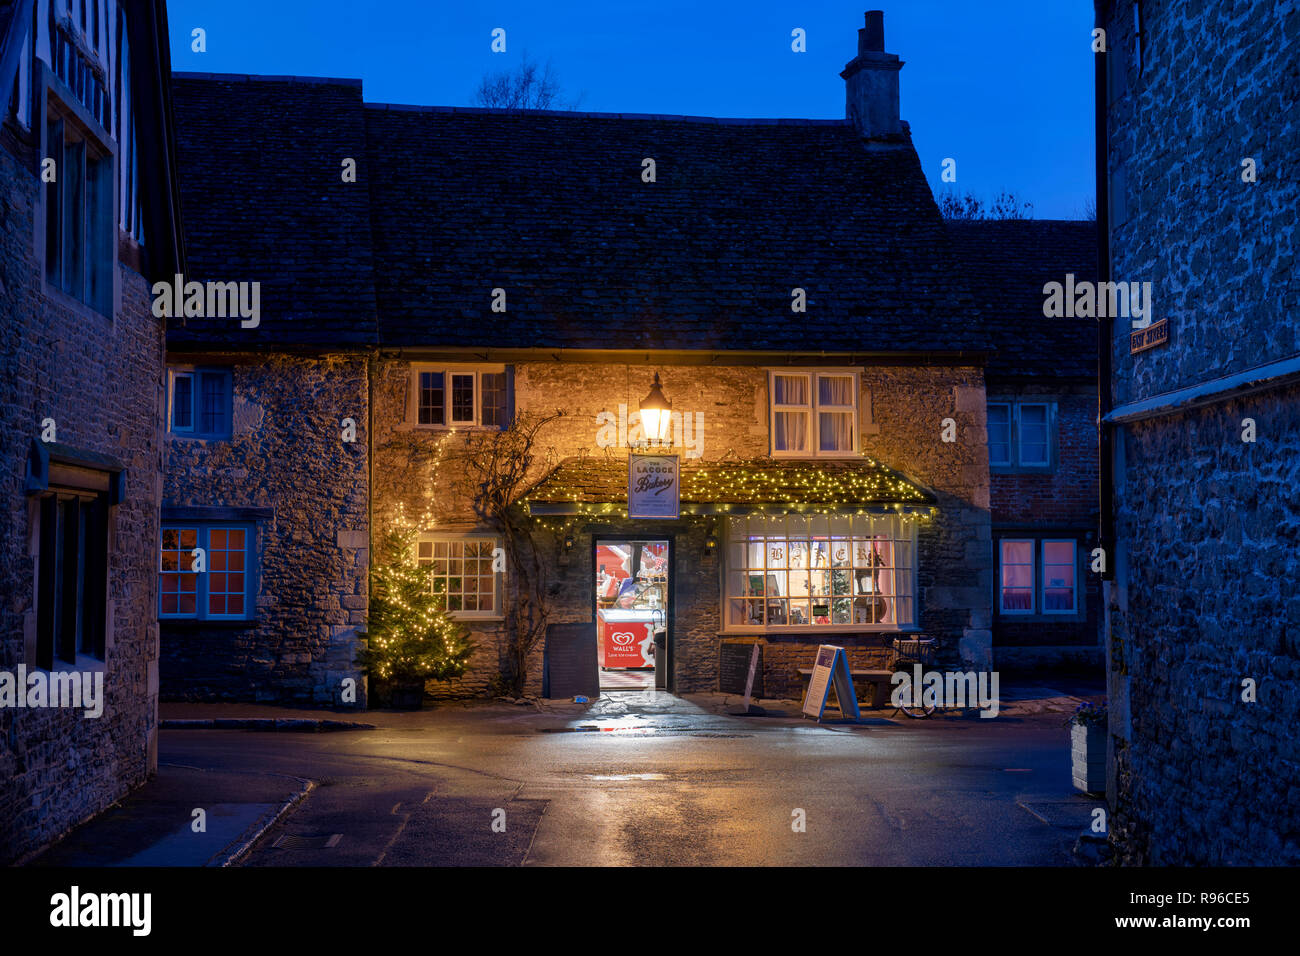 Lacock village bakery at night with a christmas tree and decorations.  Lacock, Cotswolds, Wiltshire, England Stock Photo